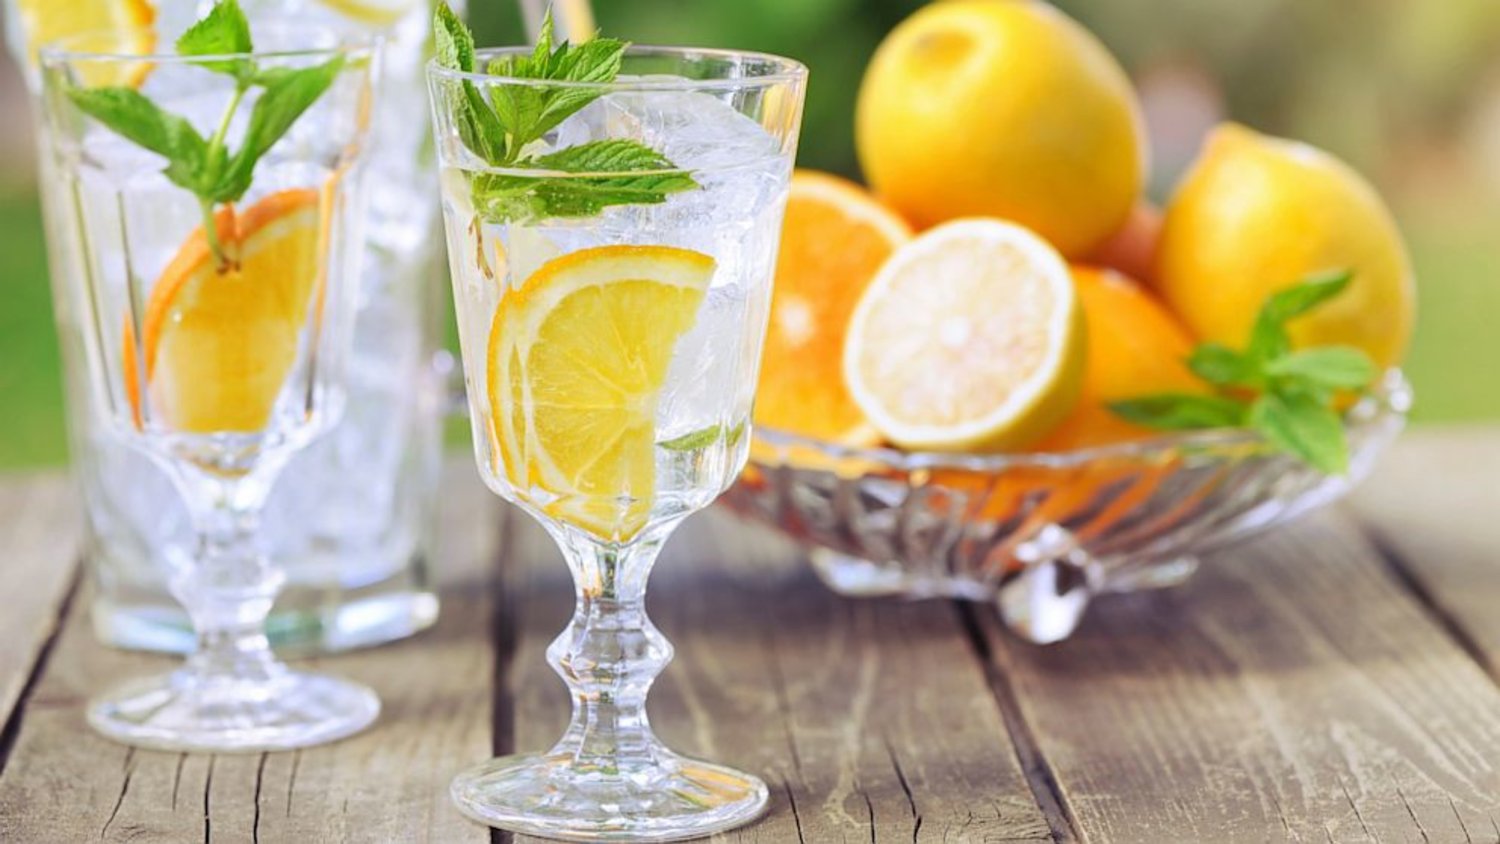 There are several options to add more flavor to water. (Getty Images)